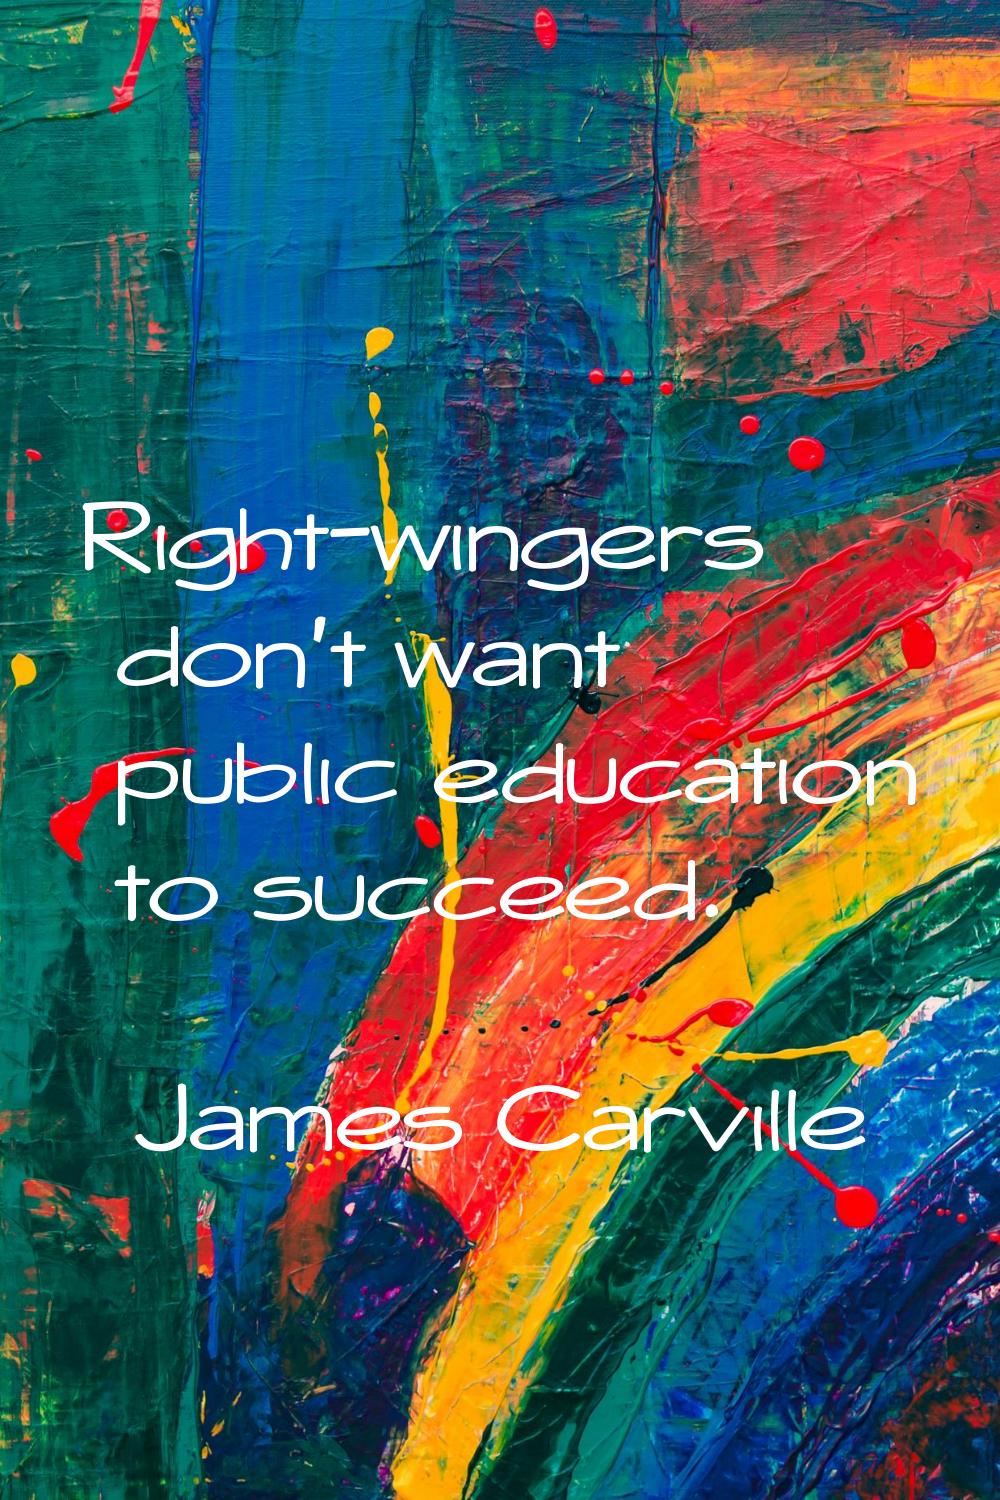 Right-wingers don't want public education to succeed.